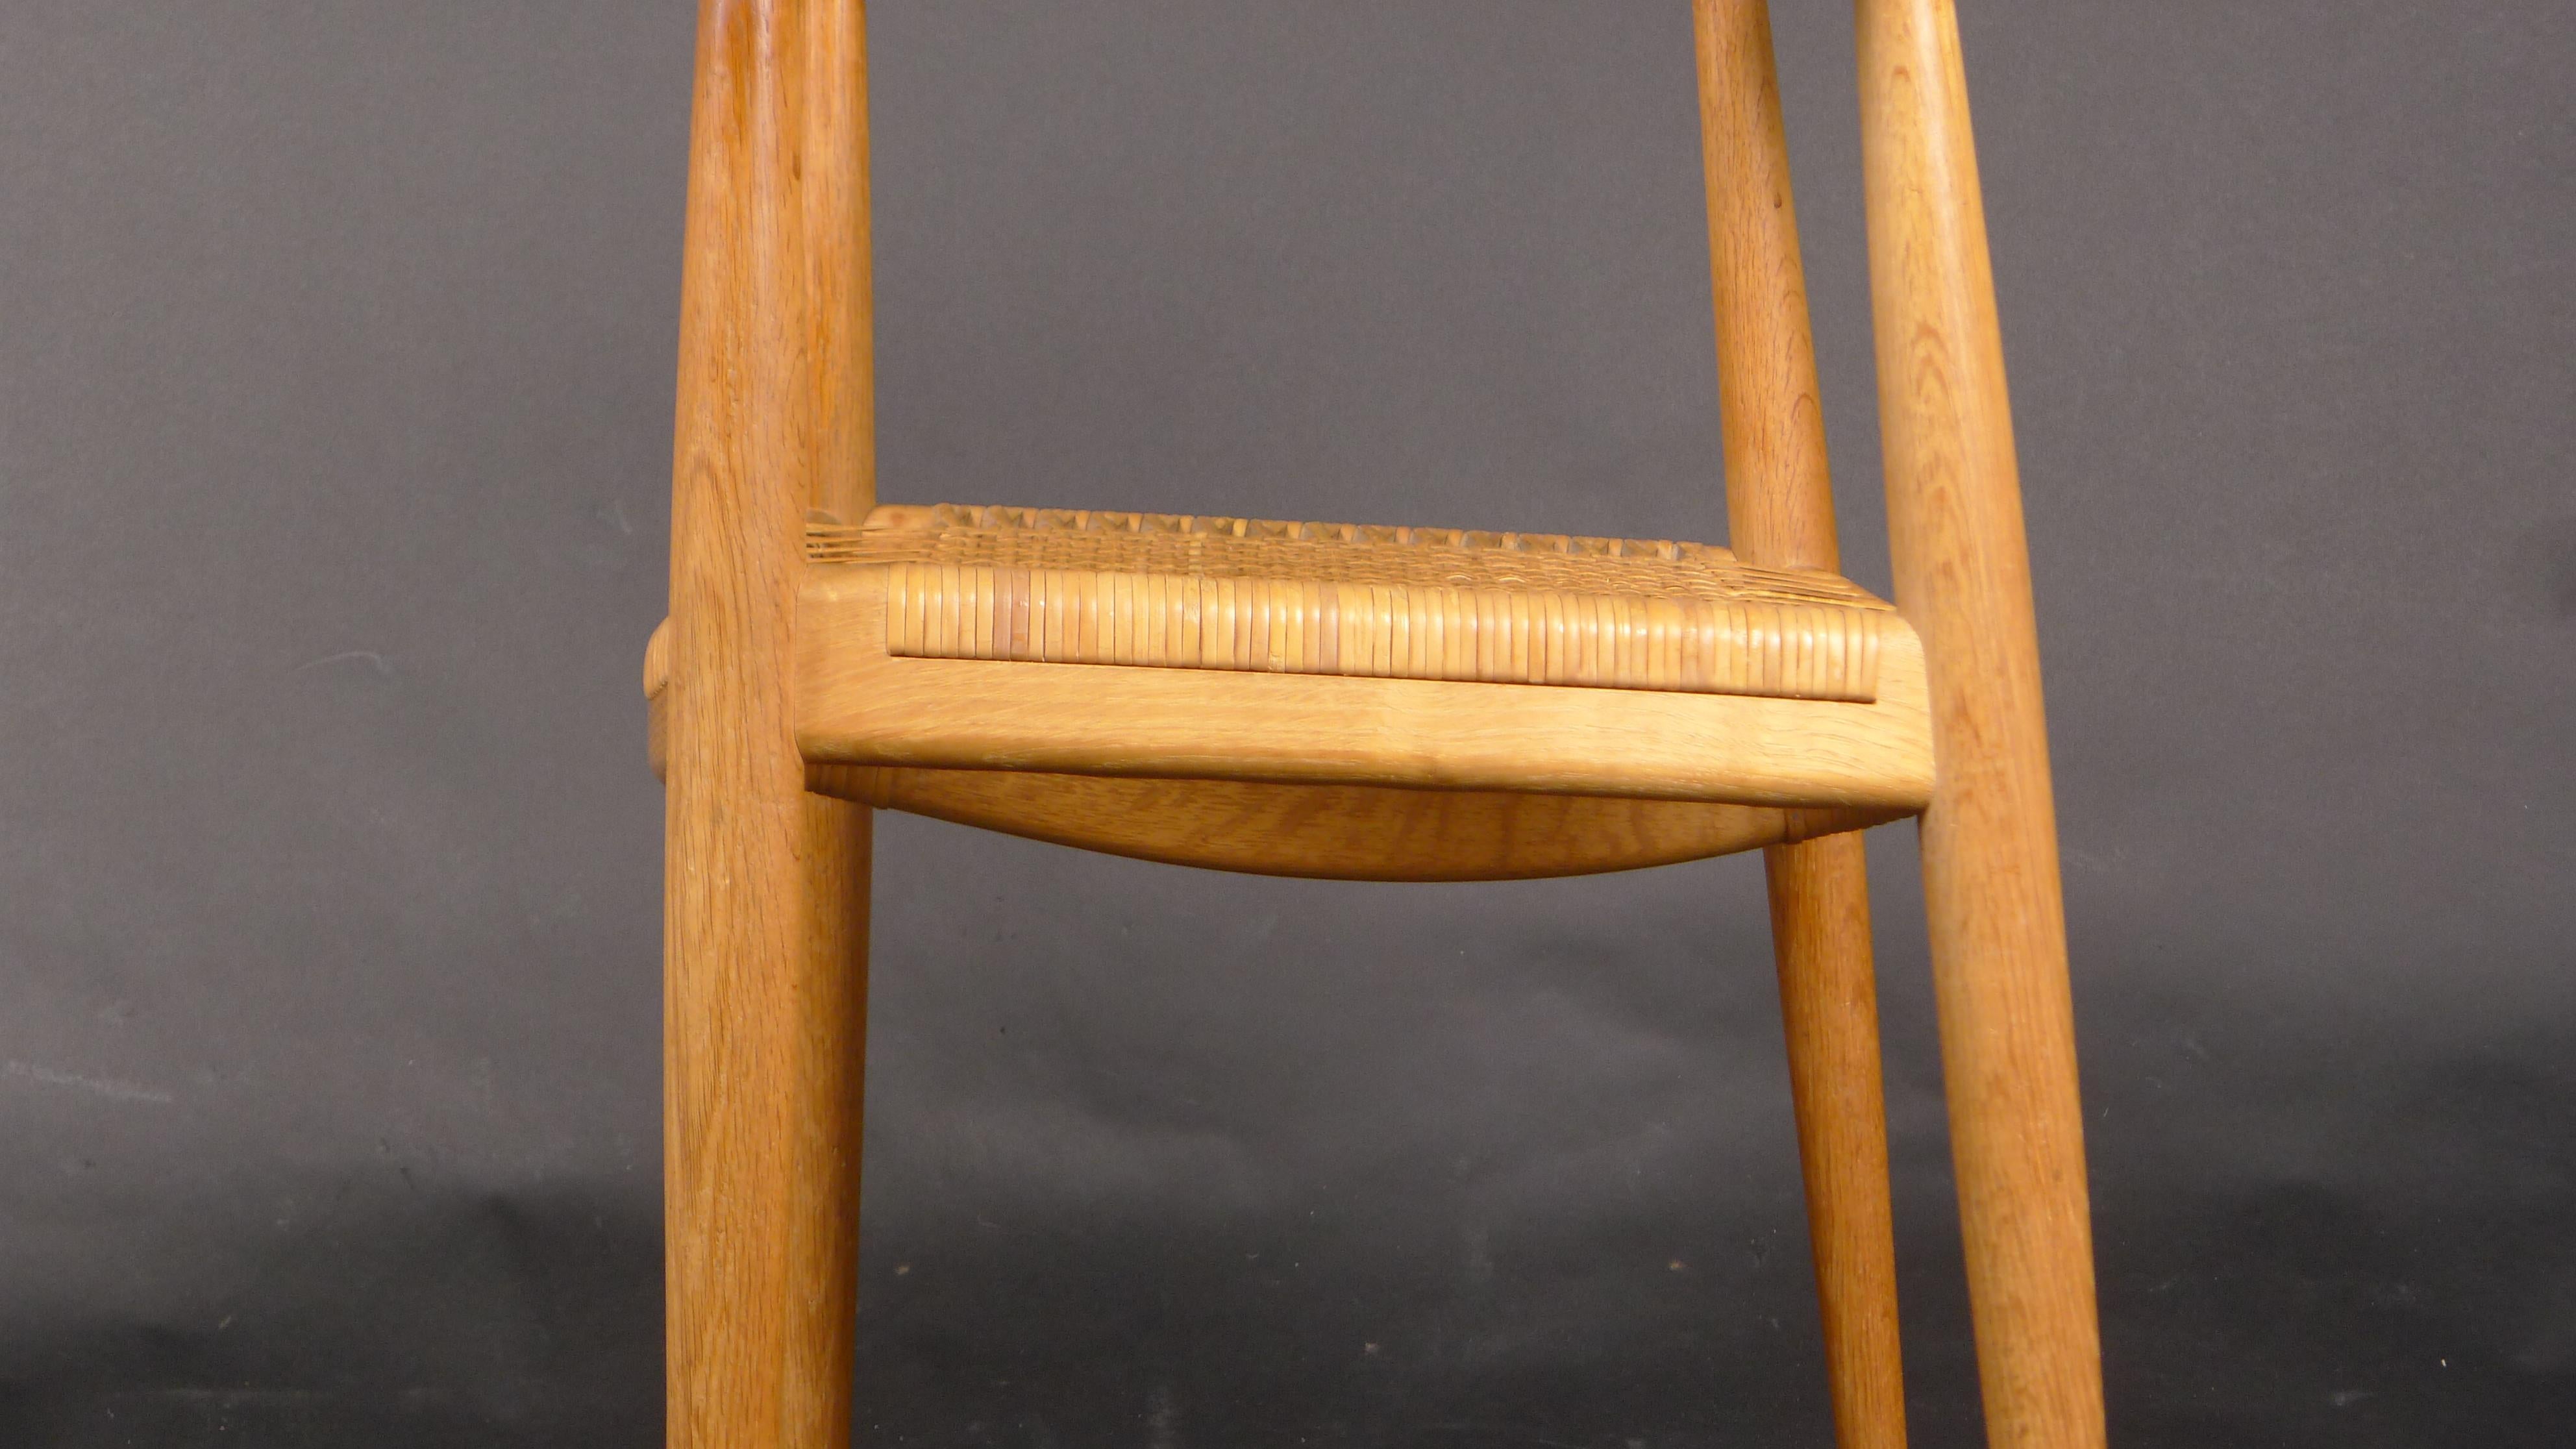 Cane Hans Wegner, Round Chair JH501, oak and cane, made by Johannes Hansen For Sale